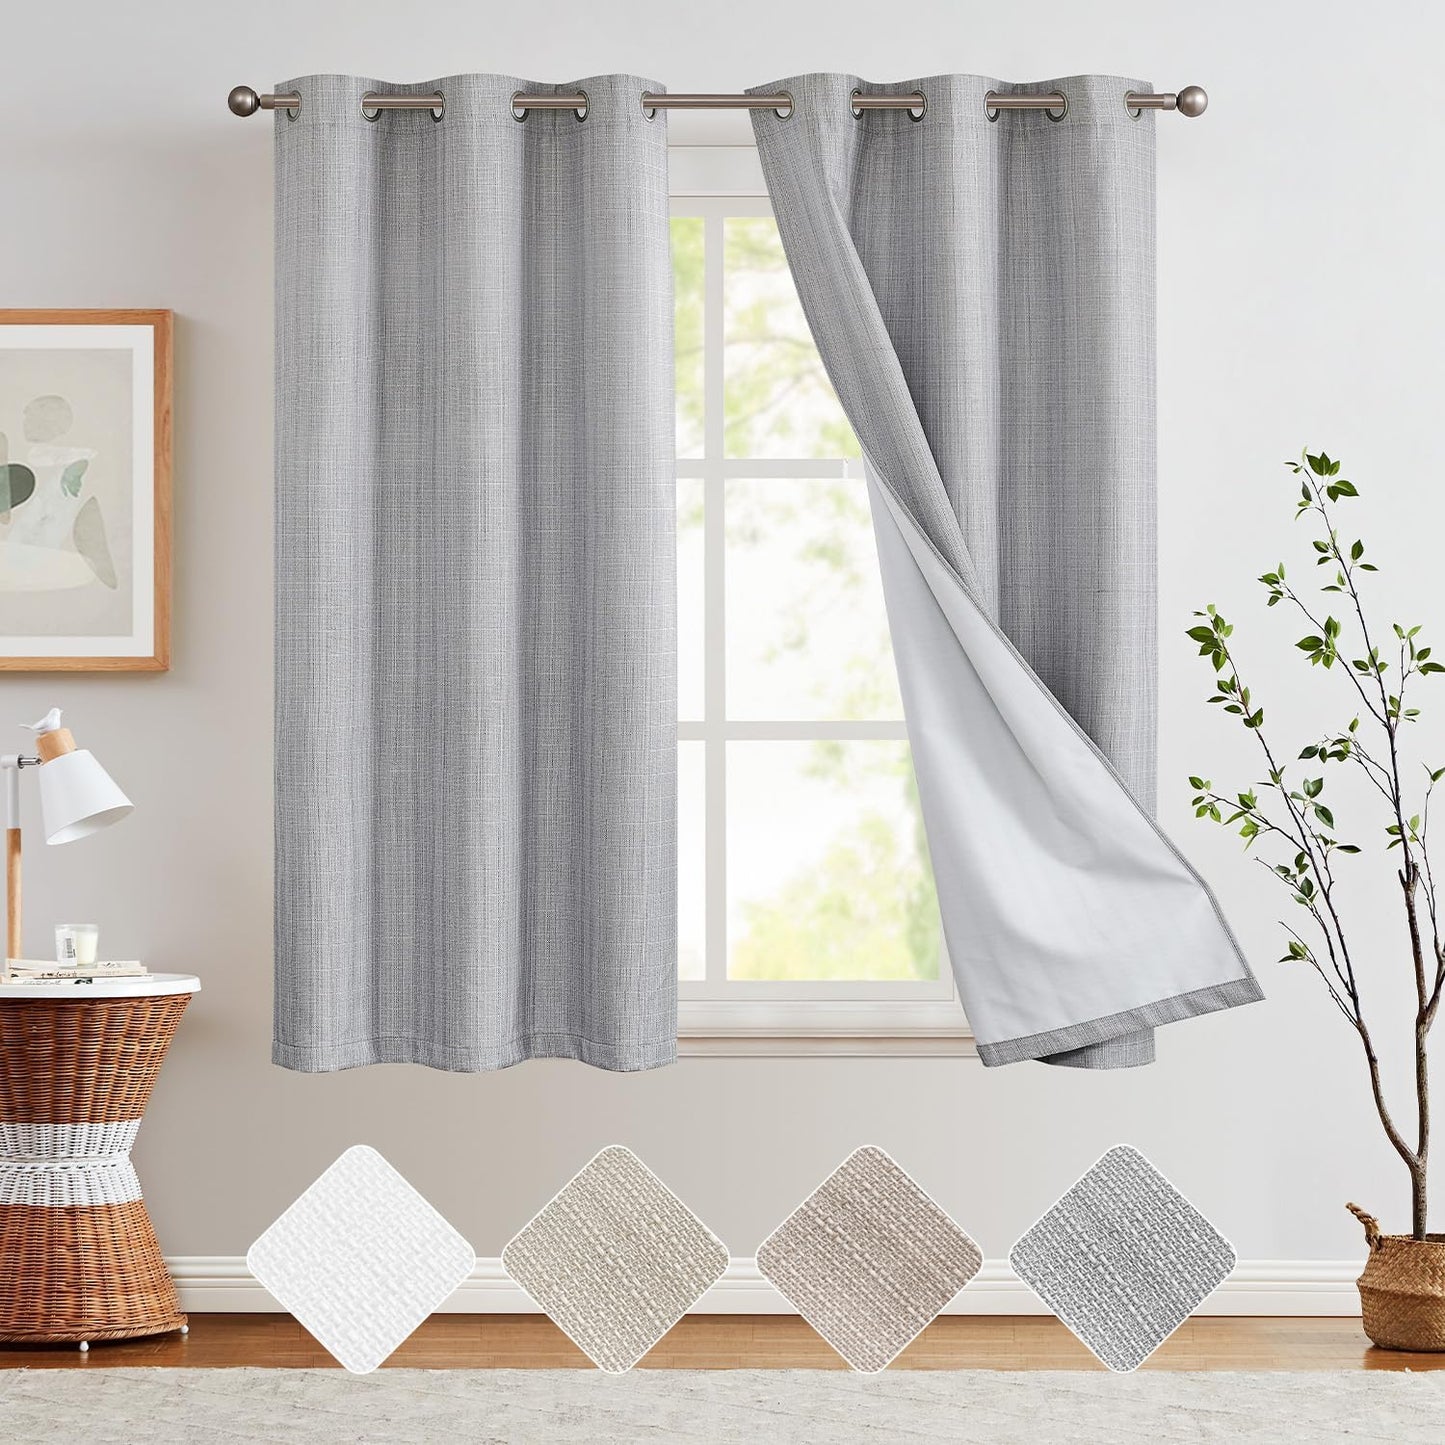 COLLACT White Linen Textured Curtains 84 Inch Length 2 Panels for Living Room Casual Weave Light Filtering Semi Sheer Curtains & Drapes for Bedroom Grommet Top Window Treatments, W38 X L84, White  COLLACT Blackout | Heathered Grey W38 X L63 